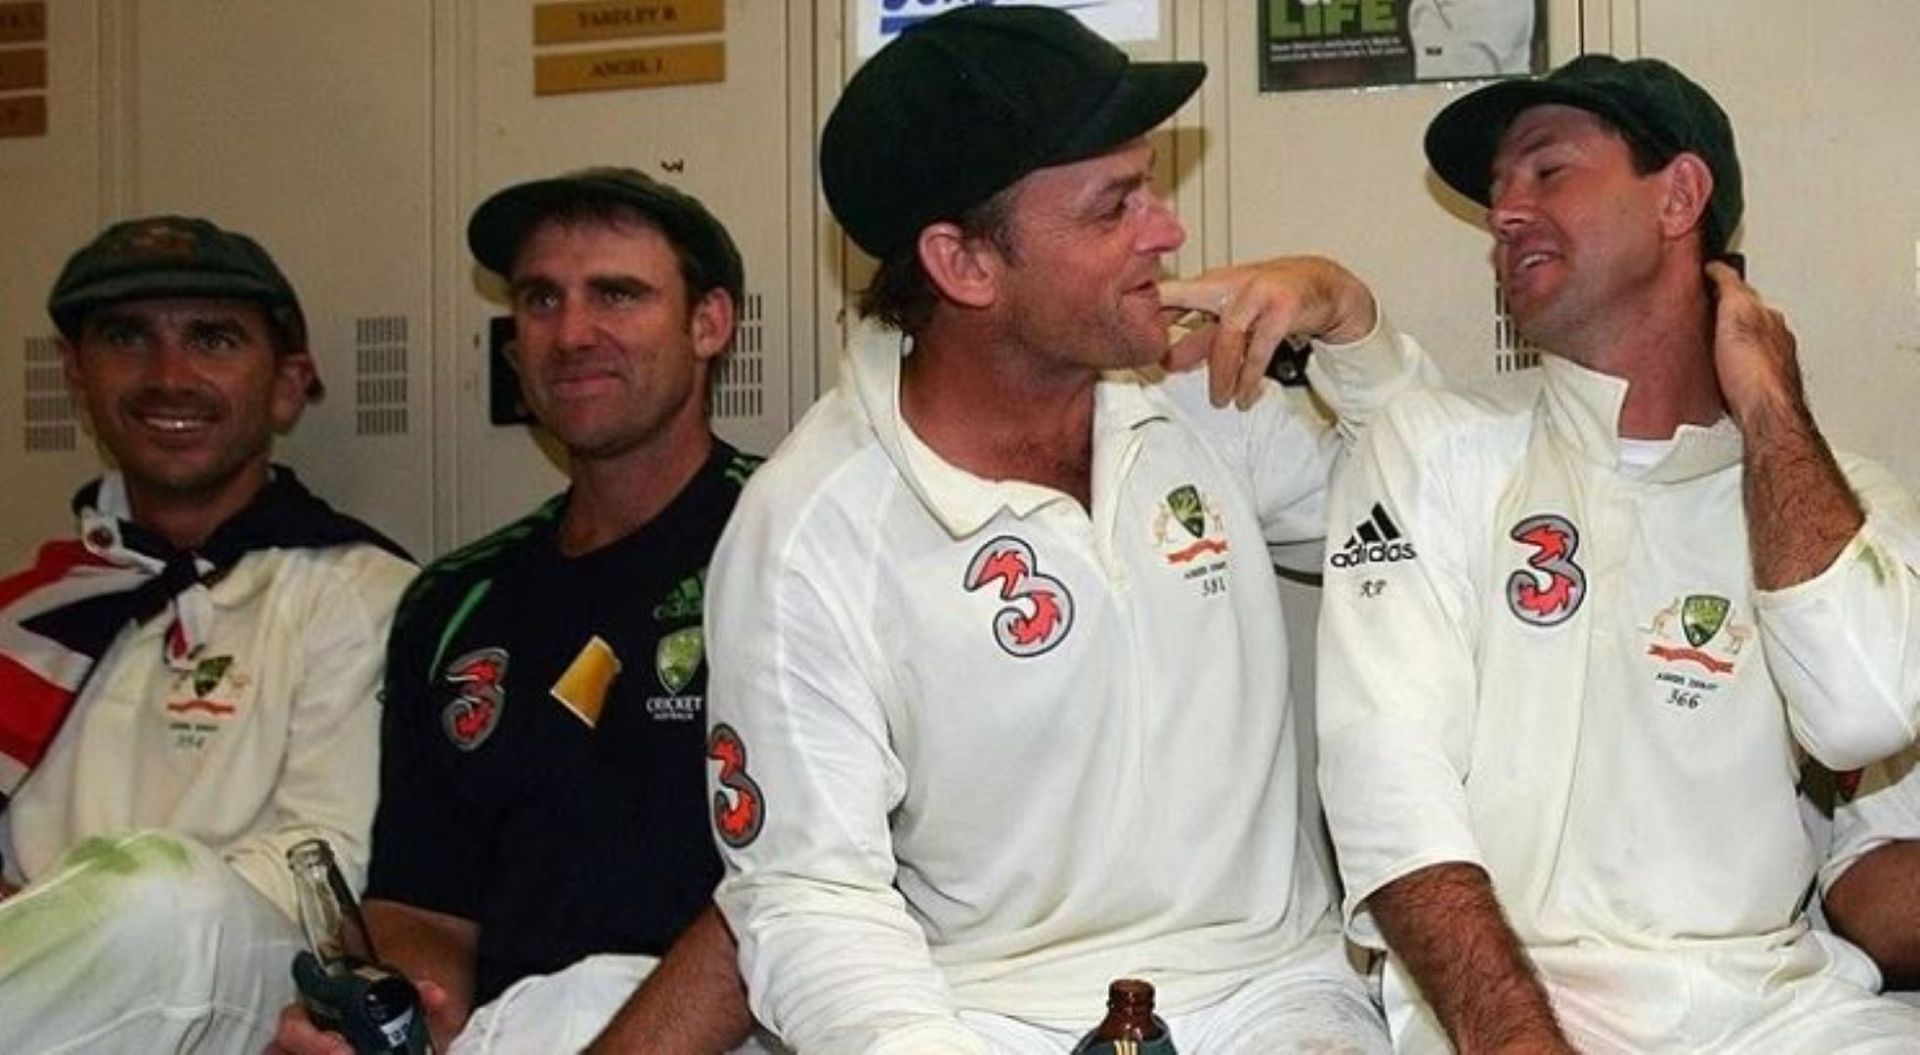 Simon Katich had a much shorter career compared to the greats in this picture.